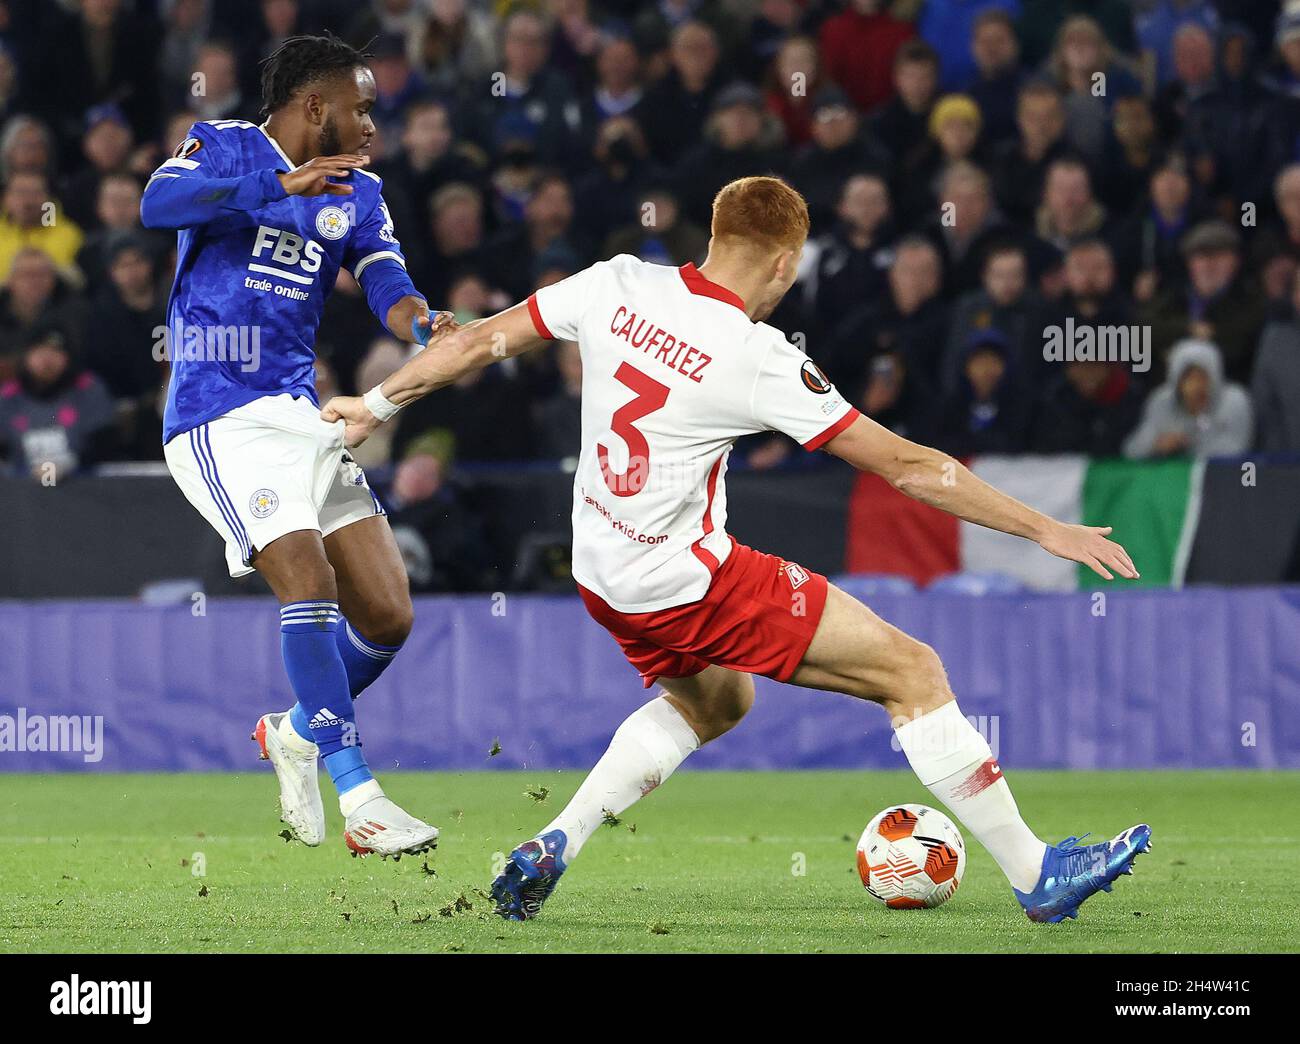 Leicester, England, 4th November 2021.  Maximiliano Caufriez of Spartak Moscow pulls the shorts of Ademola Lookman of Leicester City during the UEFA Europa League match at the King Power Stadium, Leicester. Picture credit should read: Darren Staples / Sportimage Stock Photo